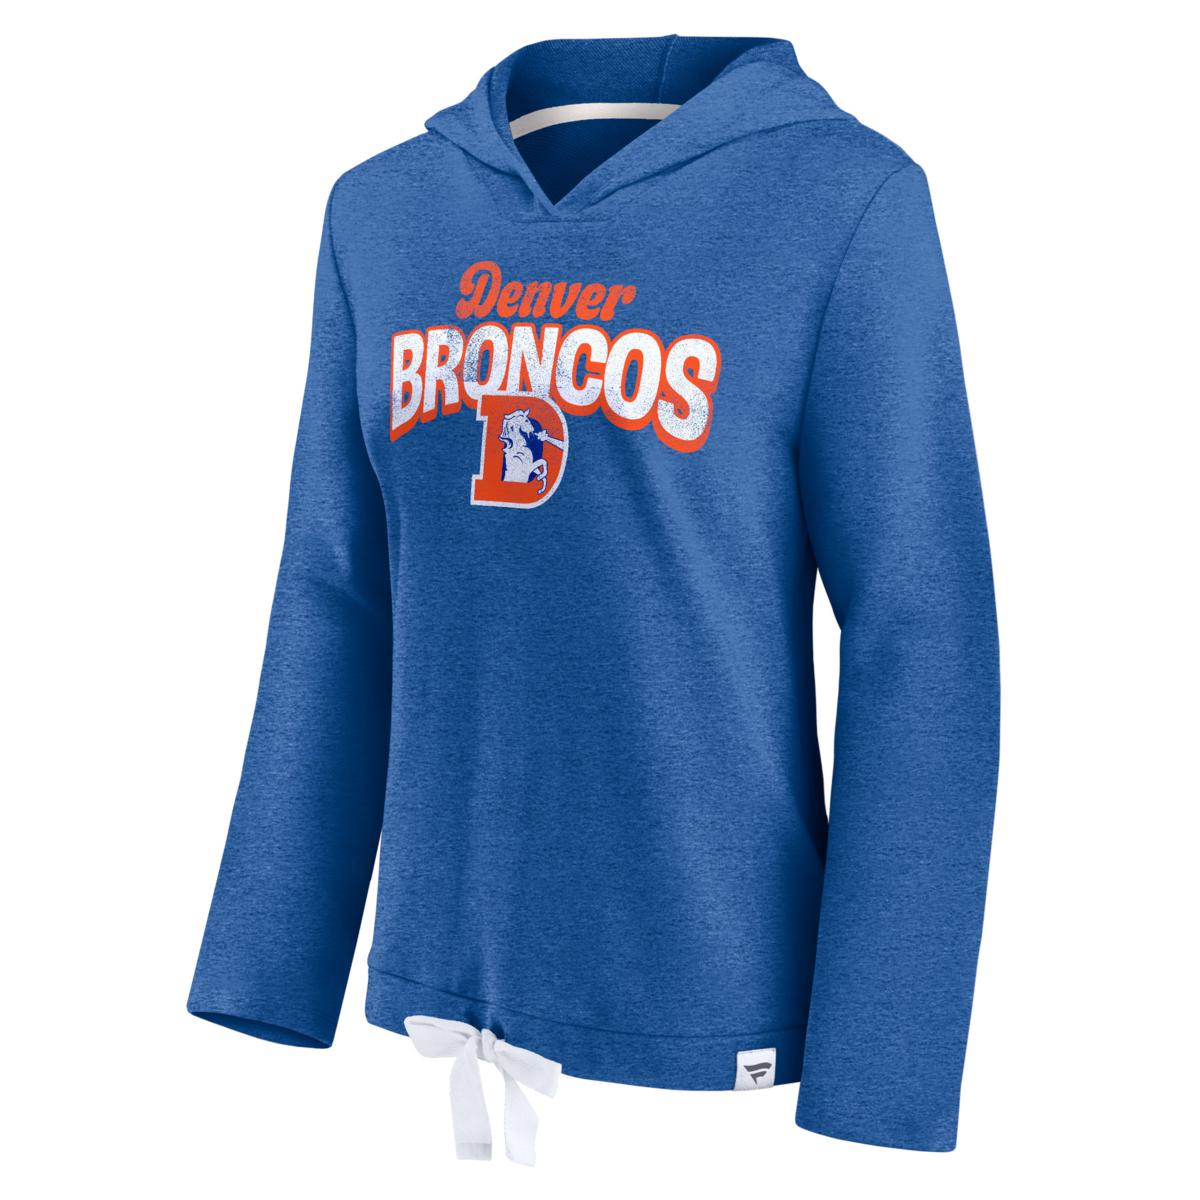 Officially Licensed NFL Women's First Team Cropped Hooded Top, Broncos